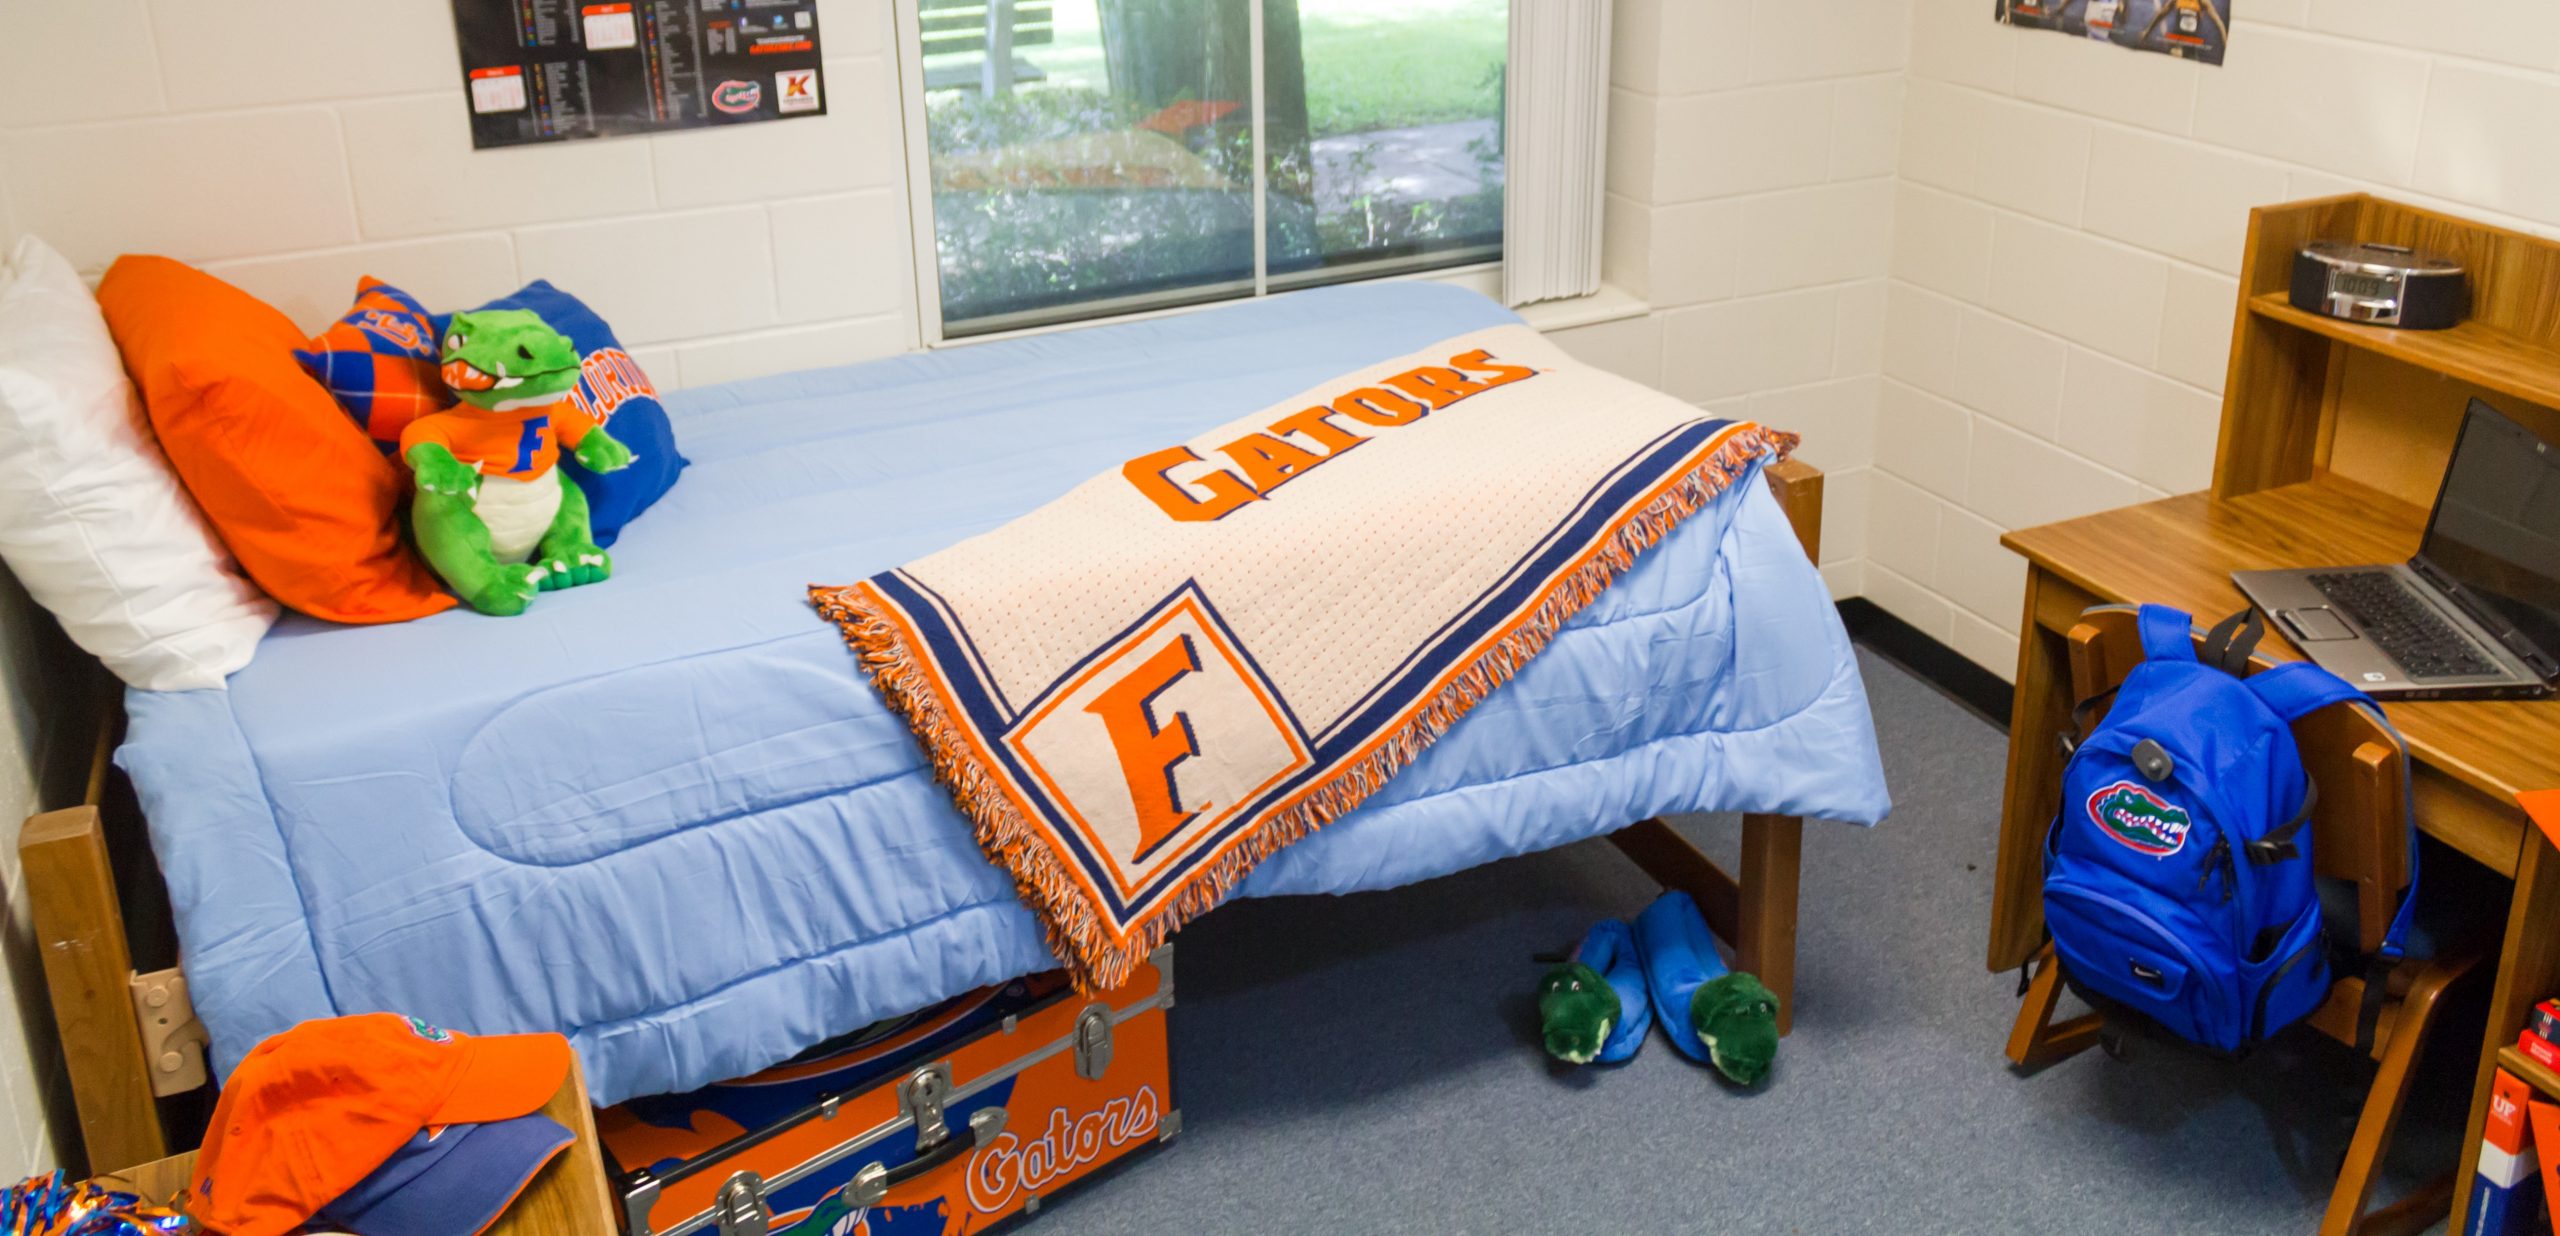 a Springs hall room decorated in Gator gear!